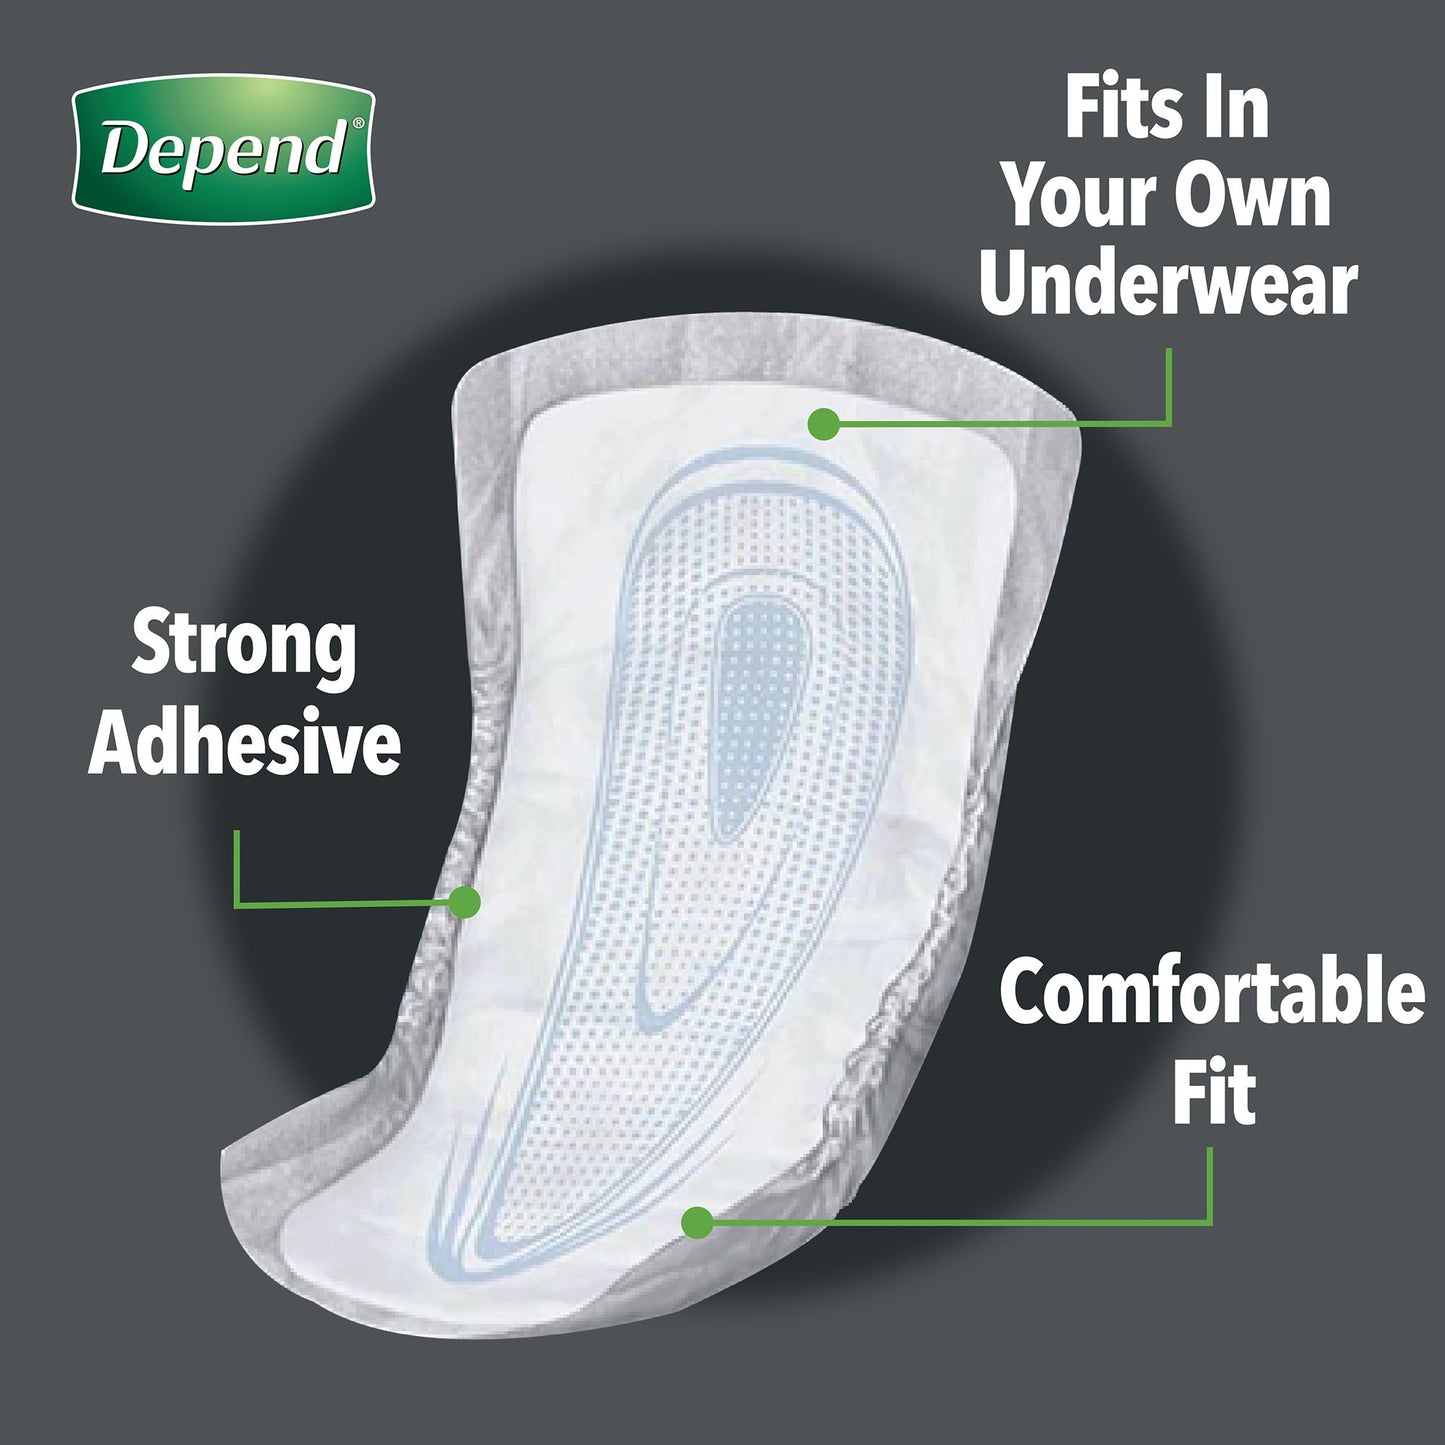 Depend Guards Incontinence Pads, Disposable, Maximum Absorbency, 12" Length, 52 ct